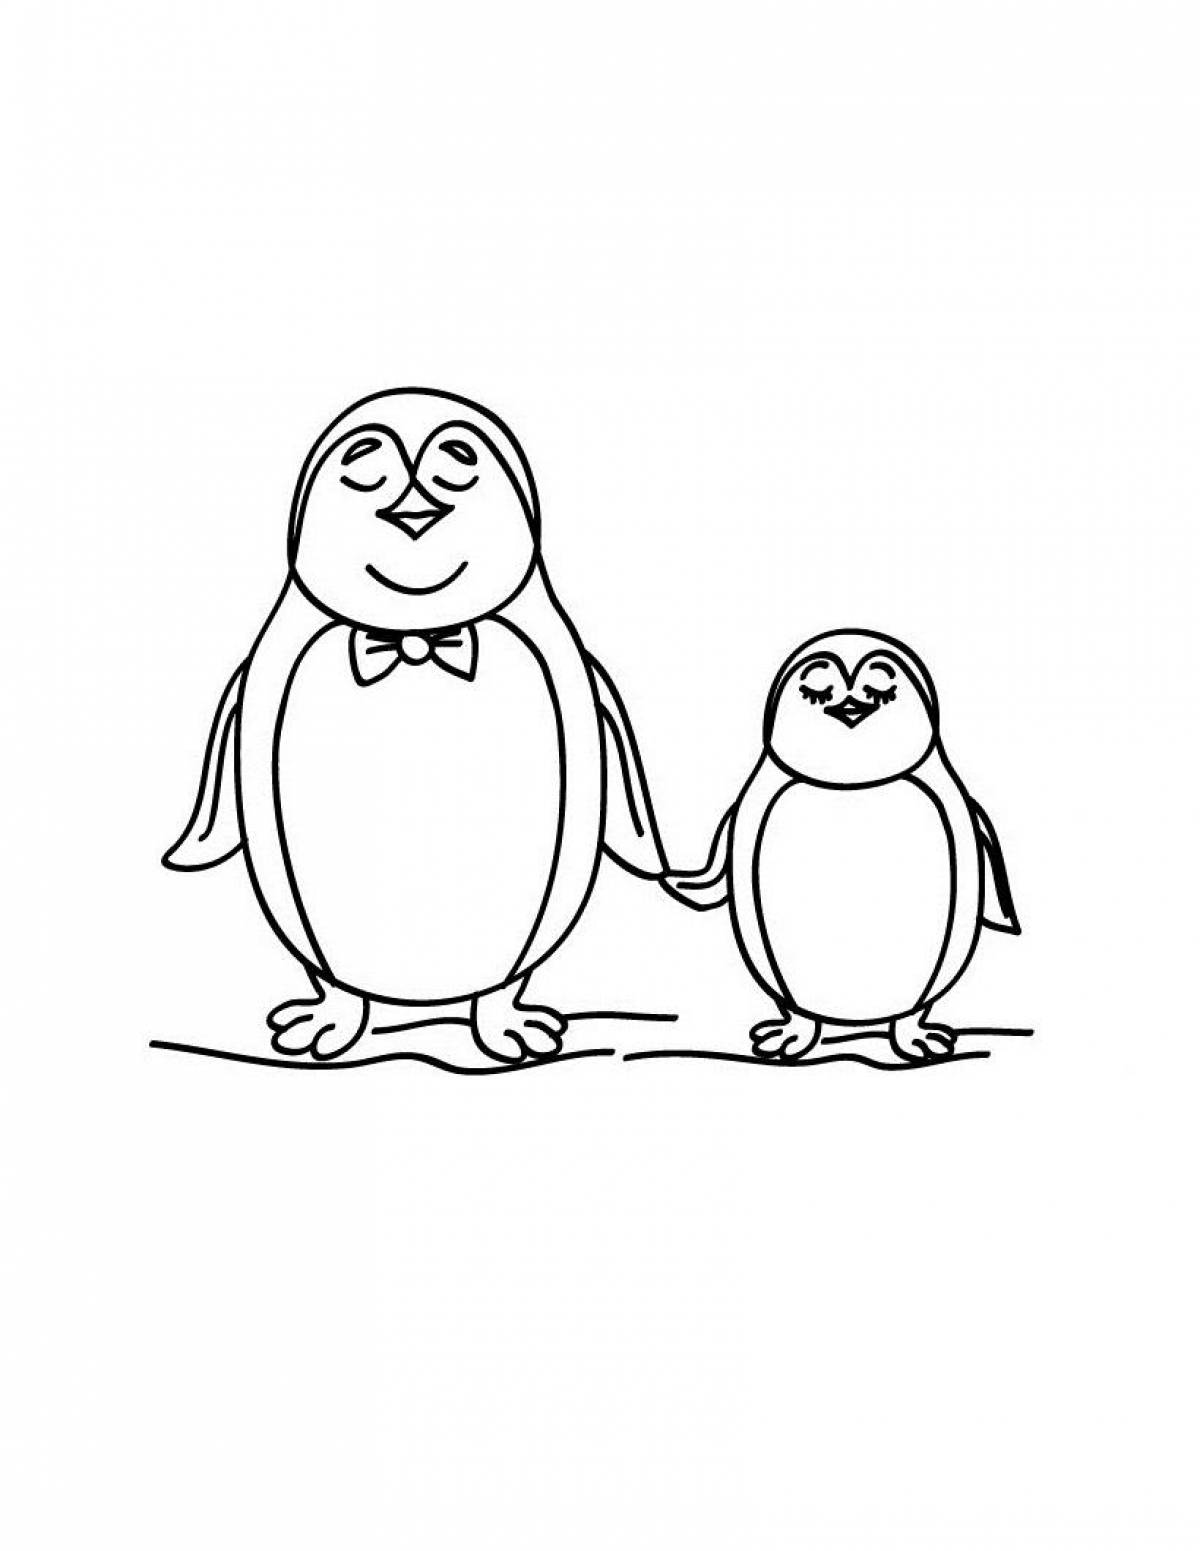 Magic penguin coloring pages for kids